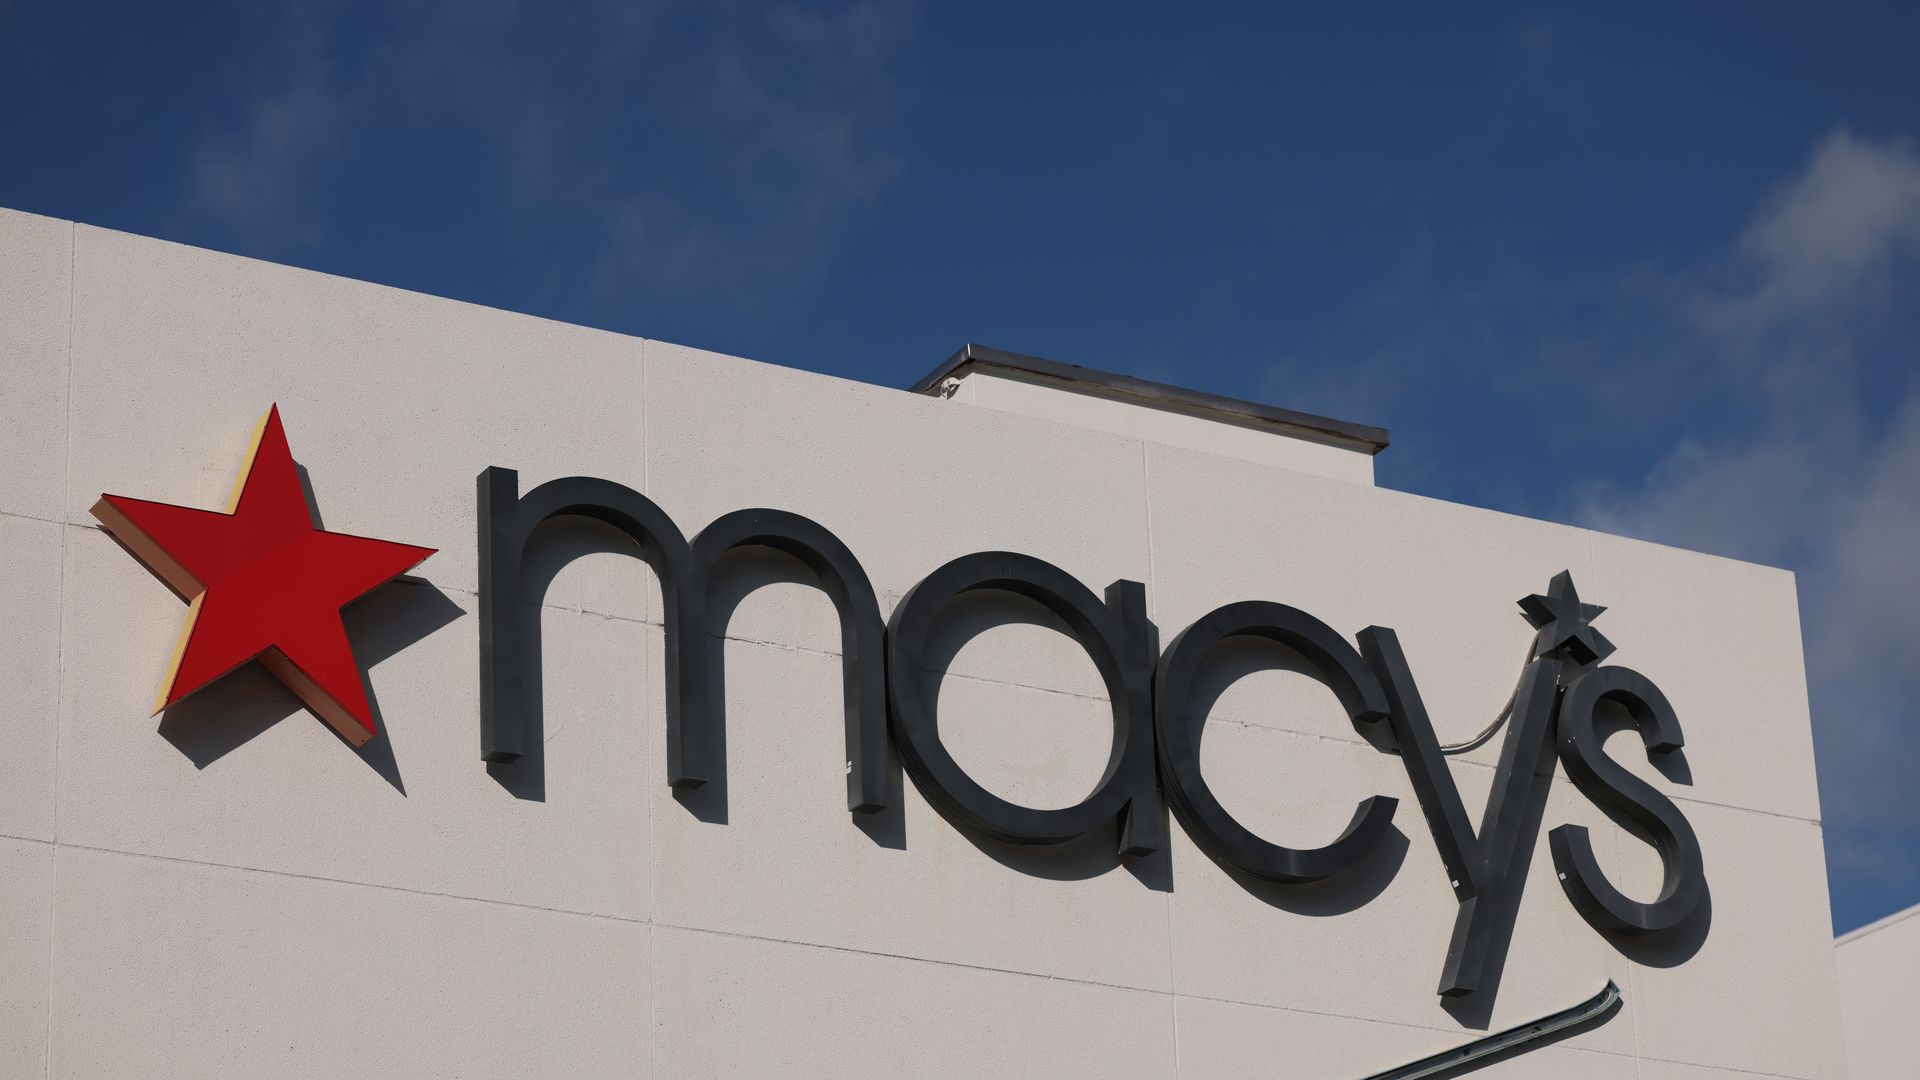 Exterior of a Macy's store with a red star and the word Macy's on building